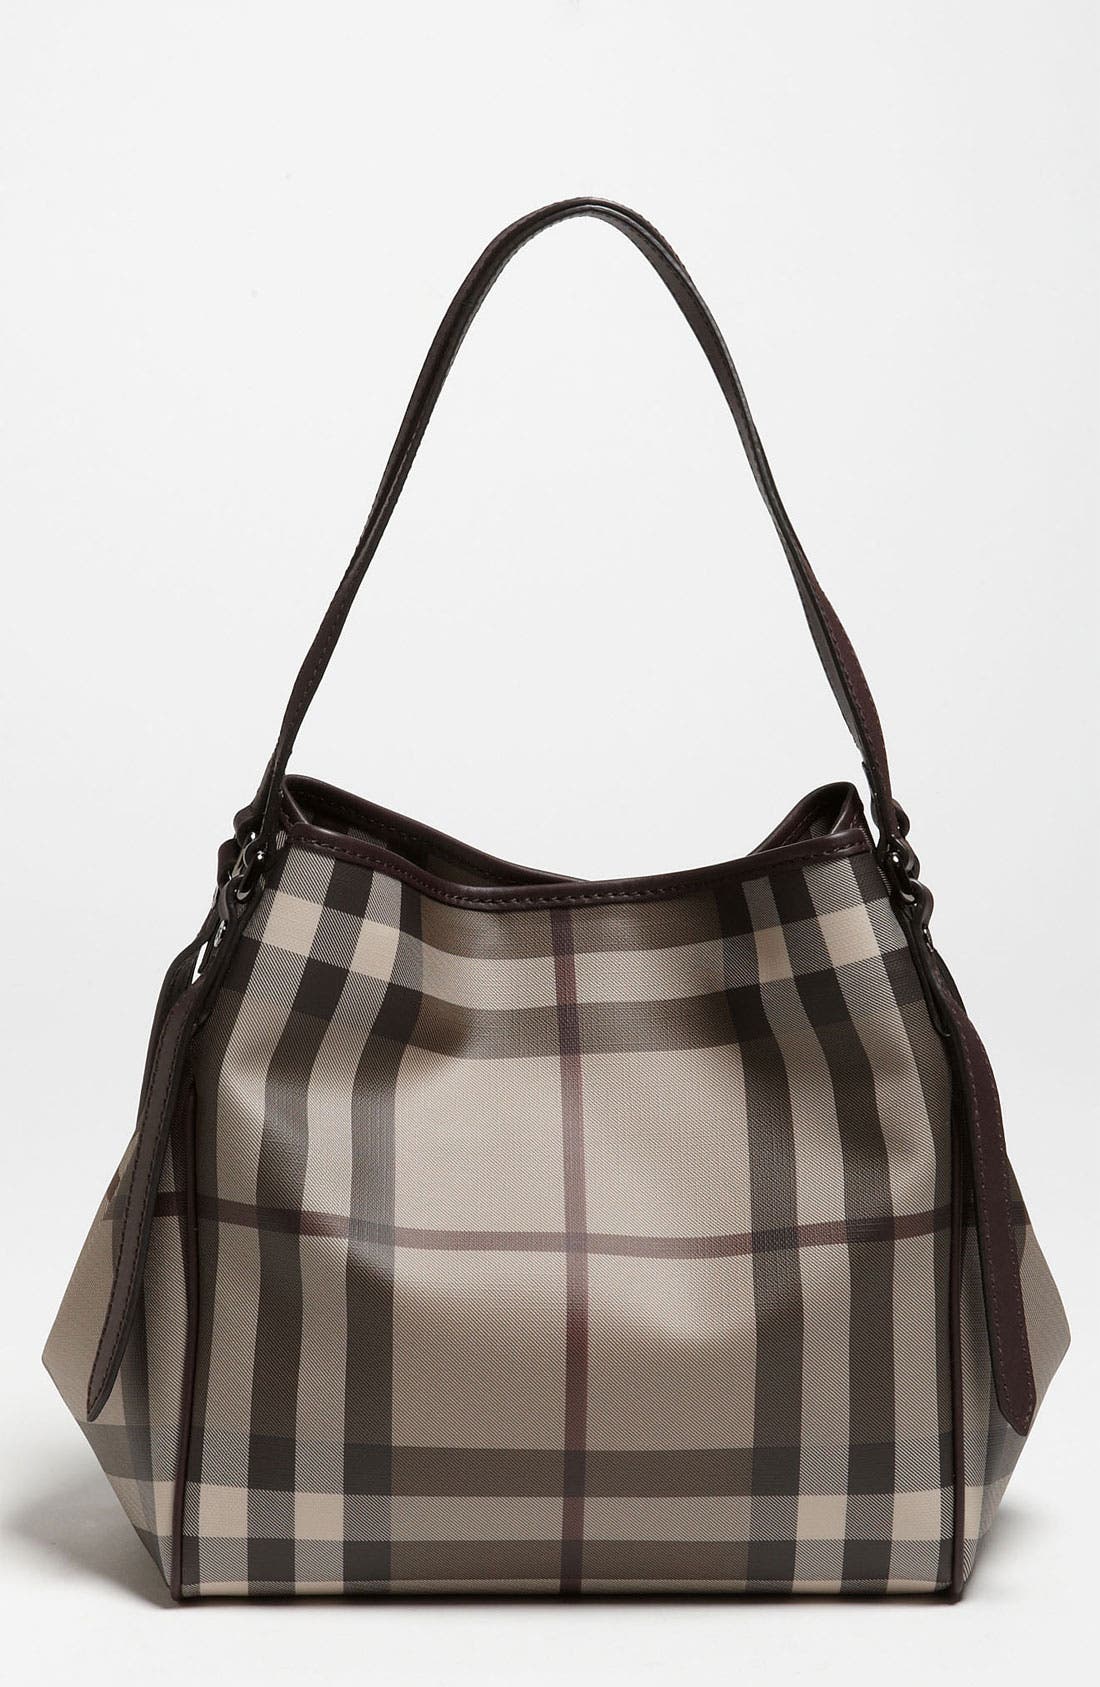 Burberry 'Smoked Check' Tote | Nordstrom